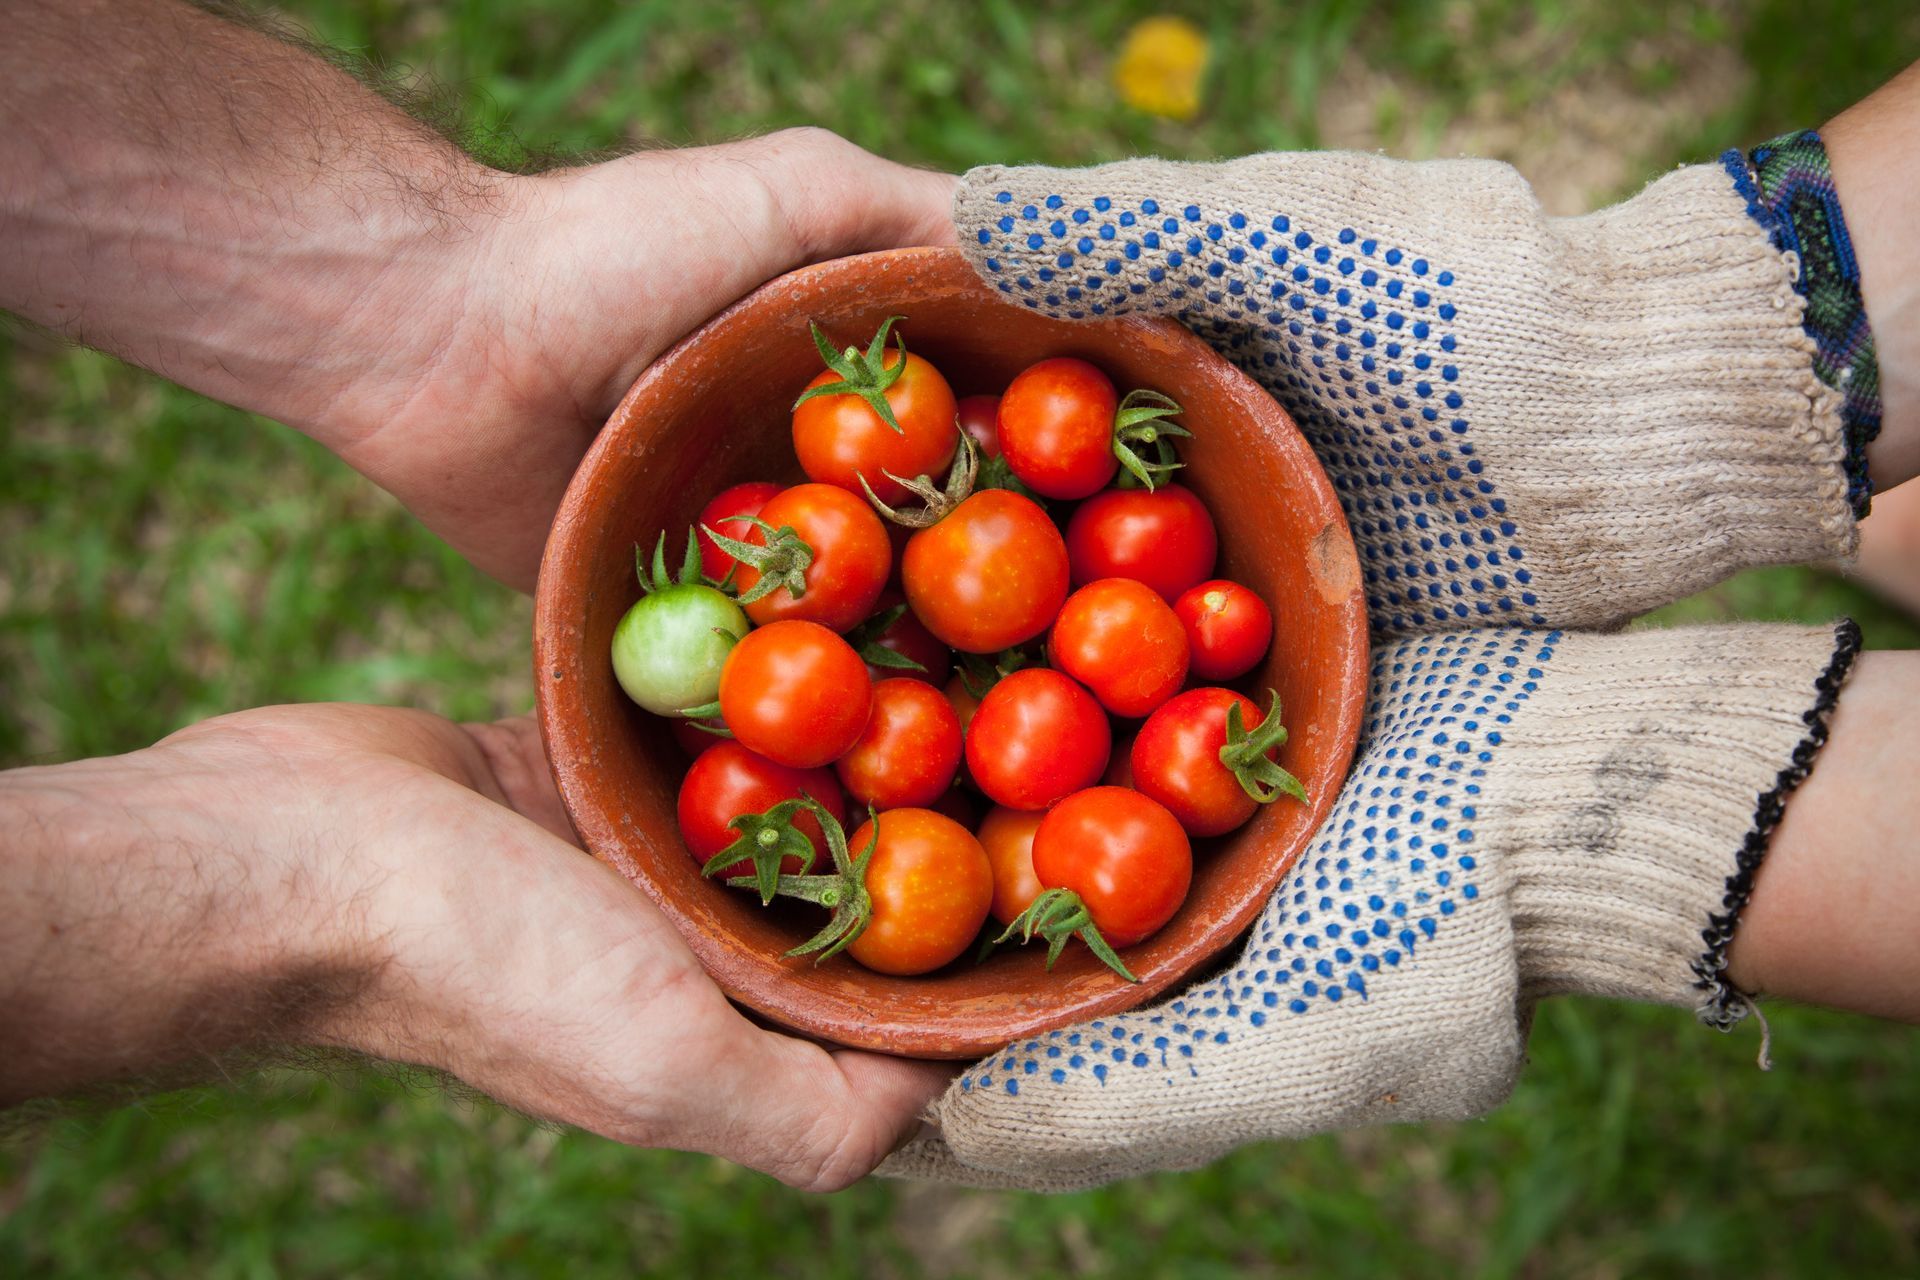 two hands in gloves hold a bowl of tomatoes